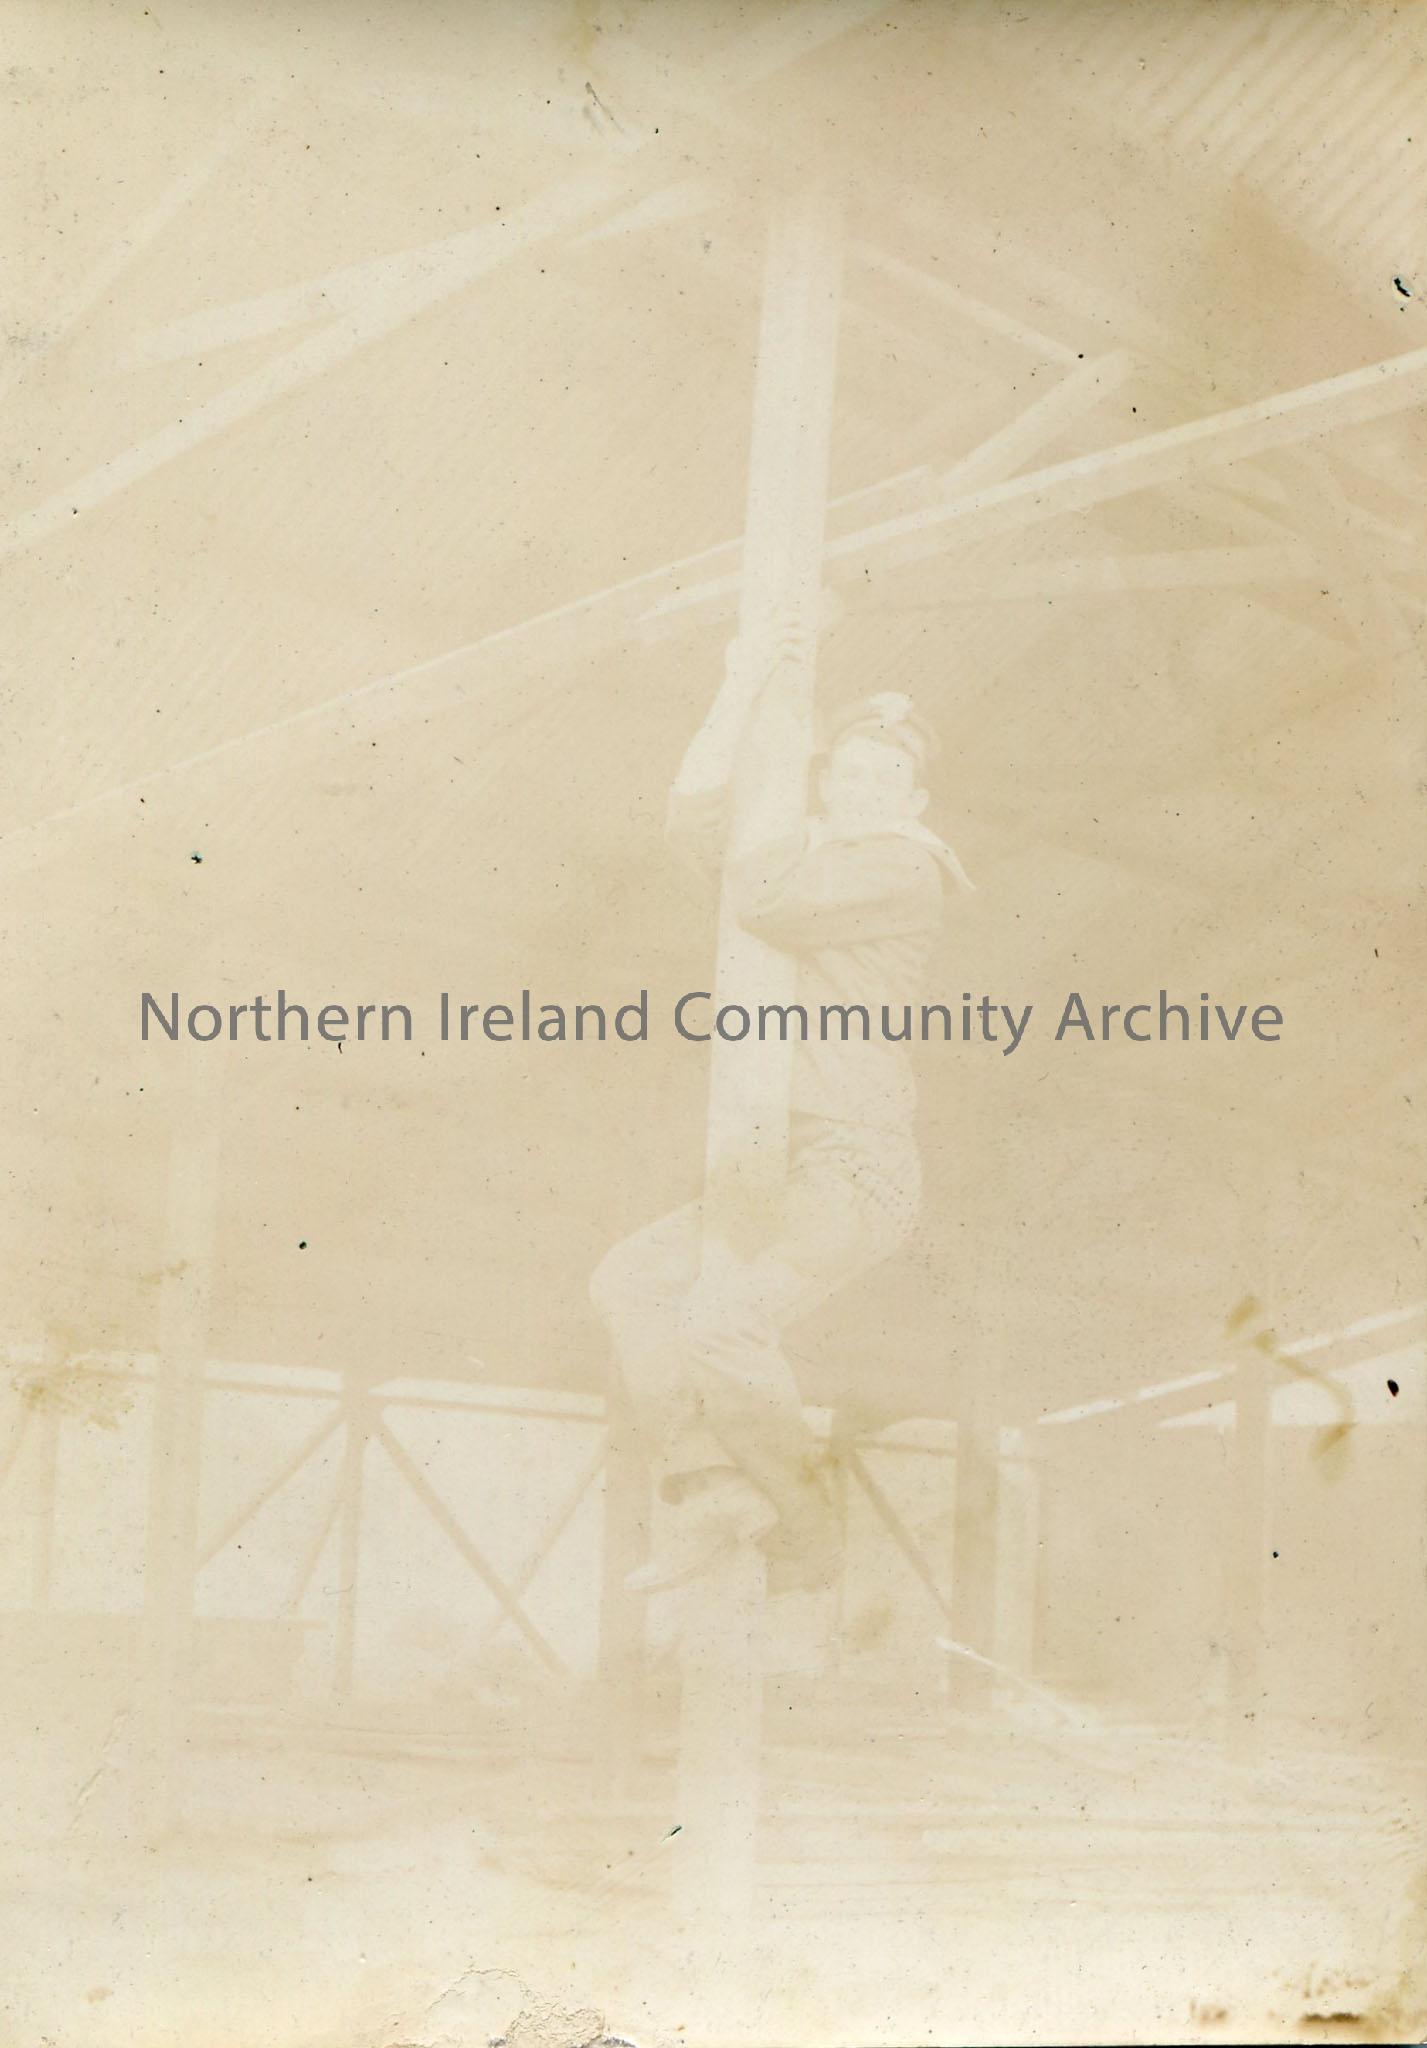 Black and white photograph of a young man climbing a wooden pole, possibly wearing a sailor or Navy uniform. Image very faded.